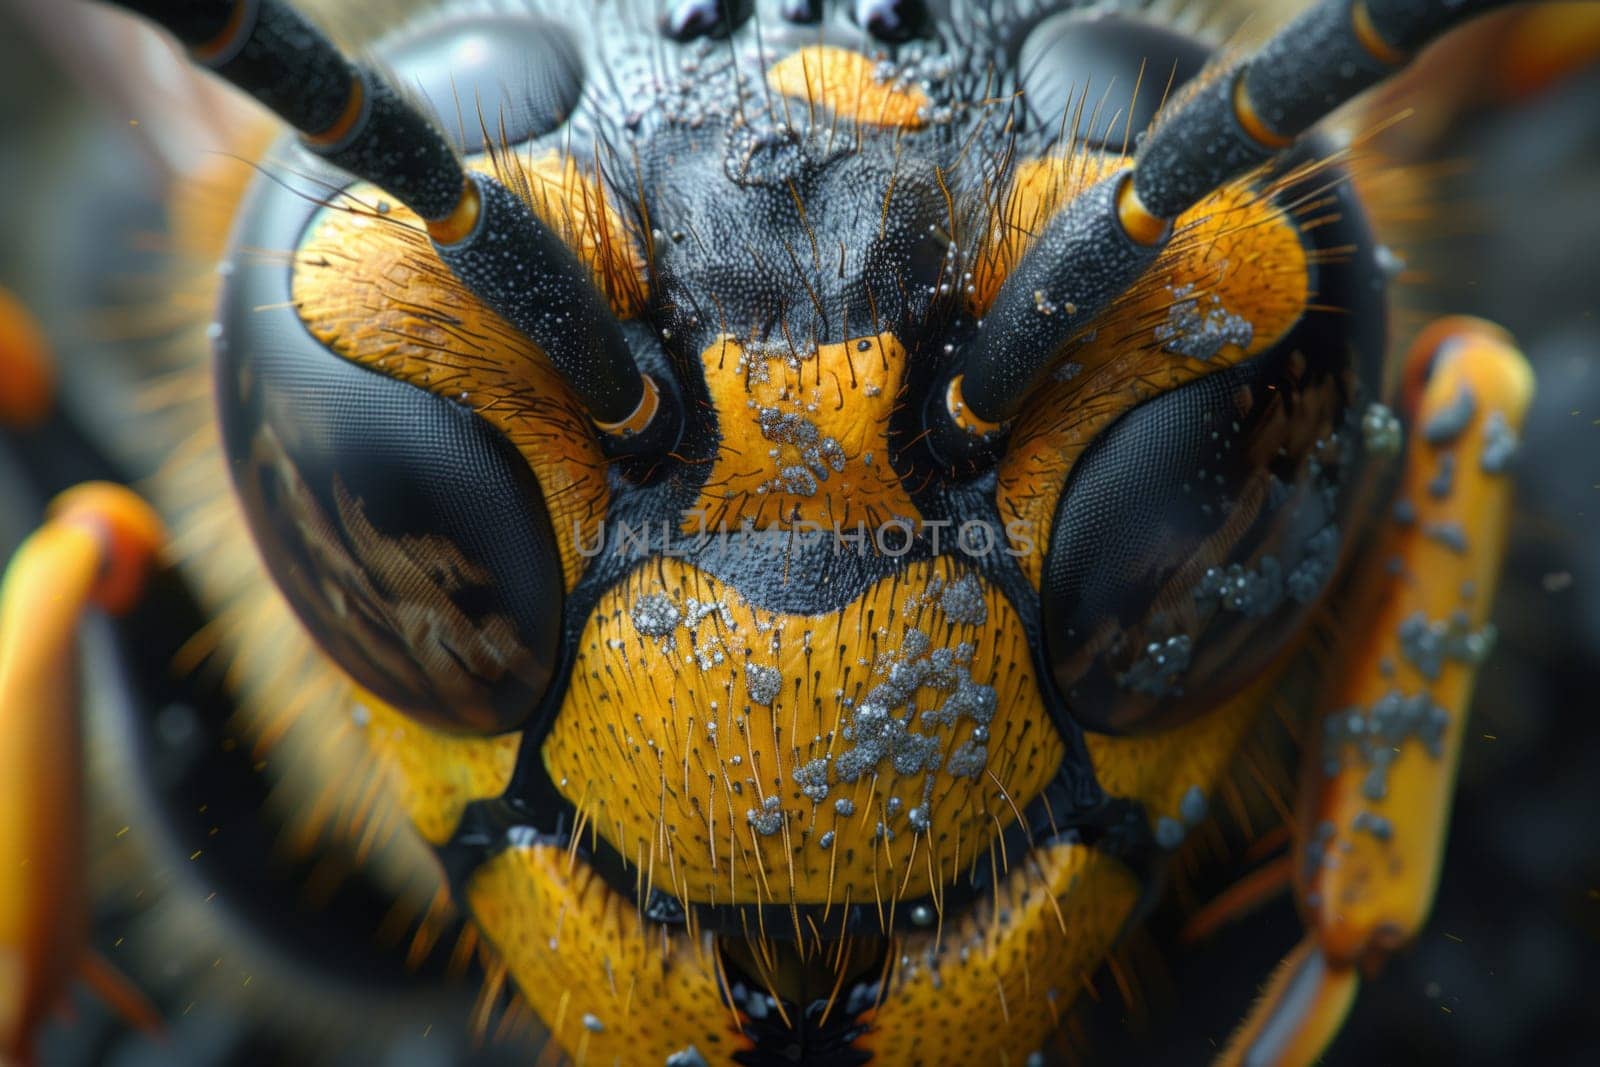 Close up of a head of a yellow and black arthropod insect with large eyes by richwolf